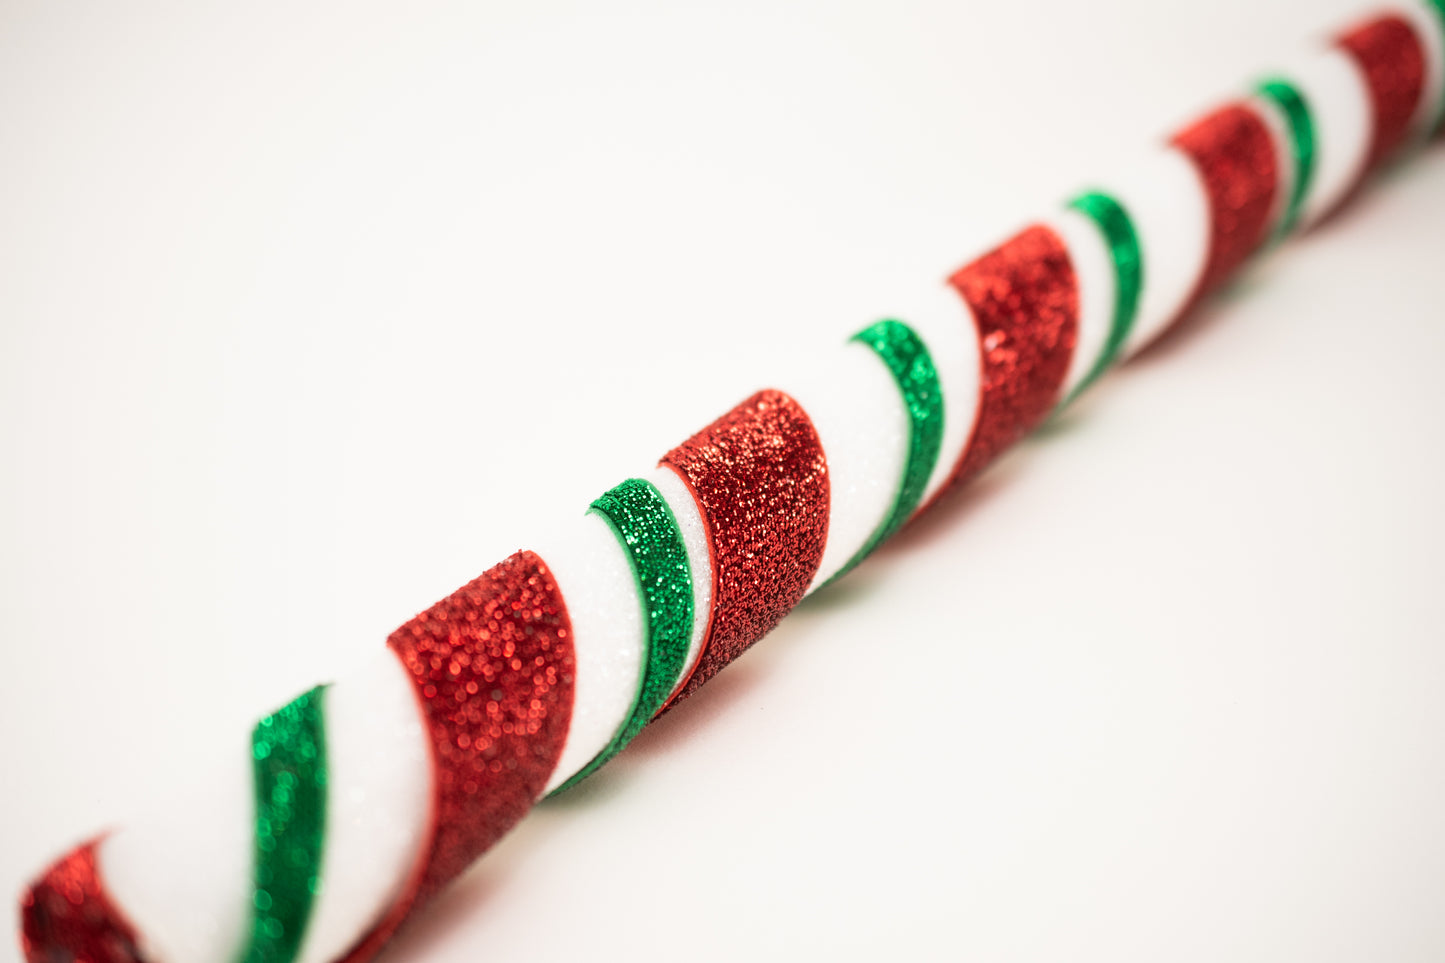 Playful Candy Cane Spray 31" - Red/White